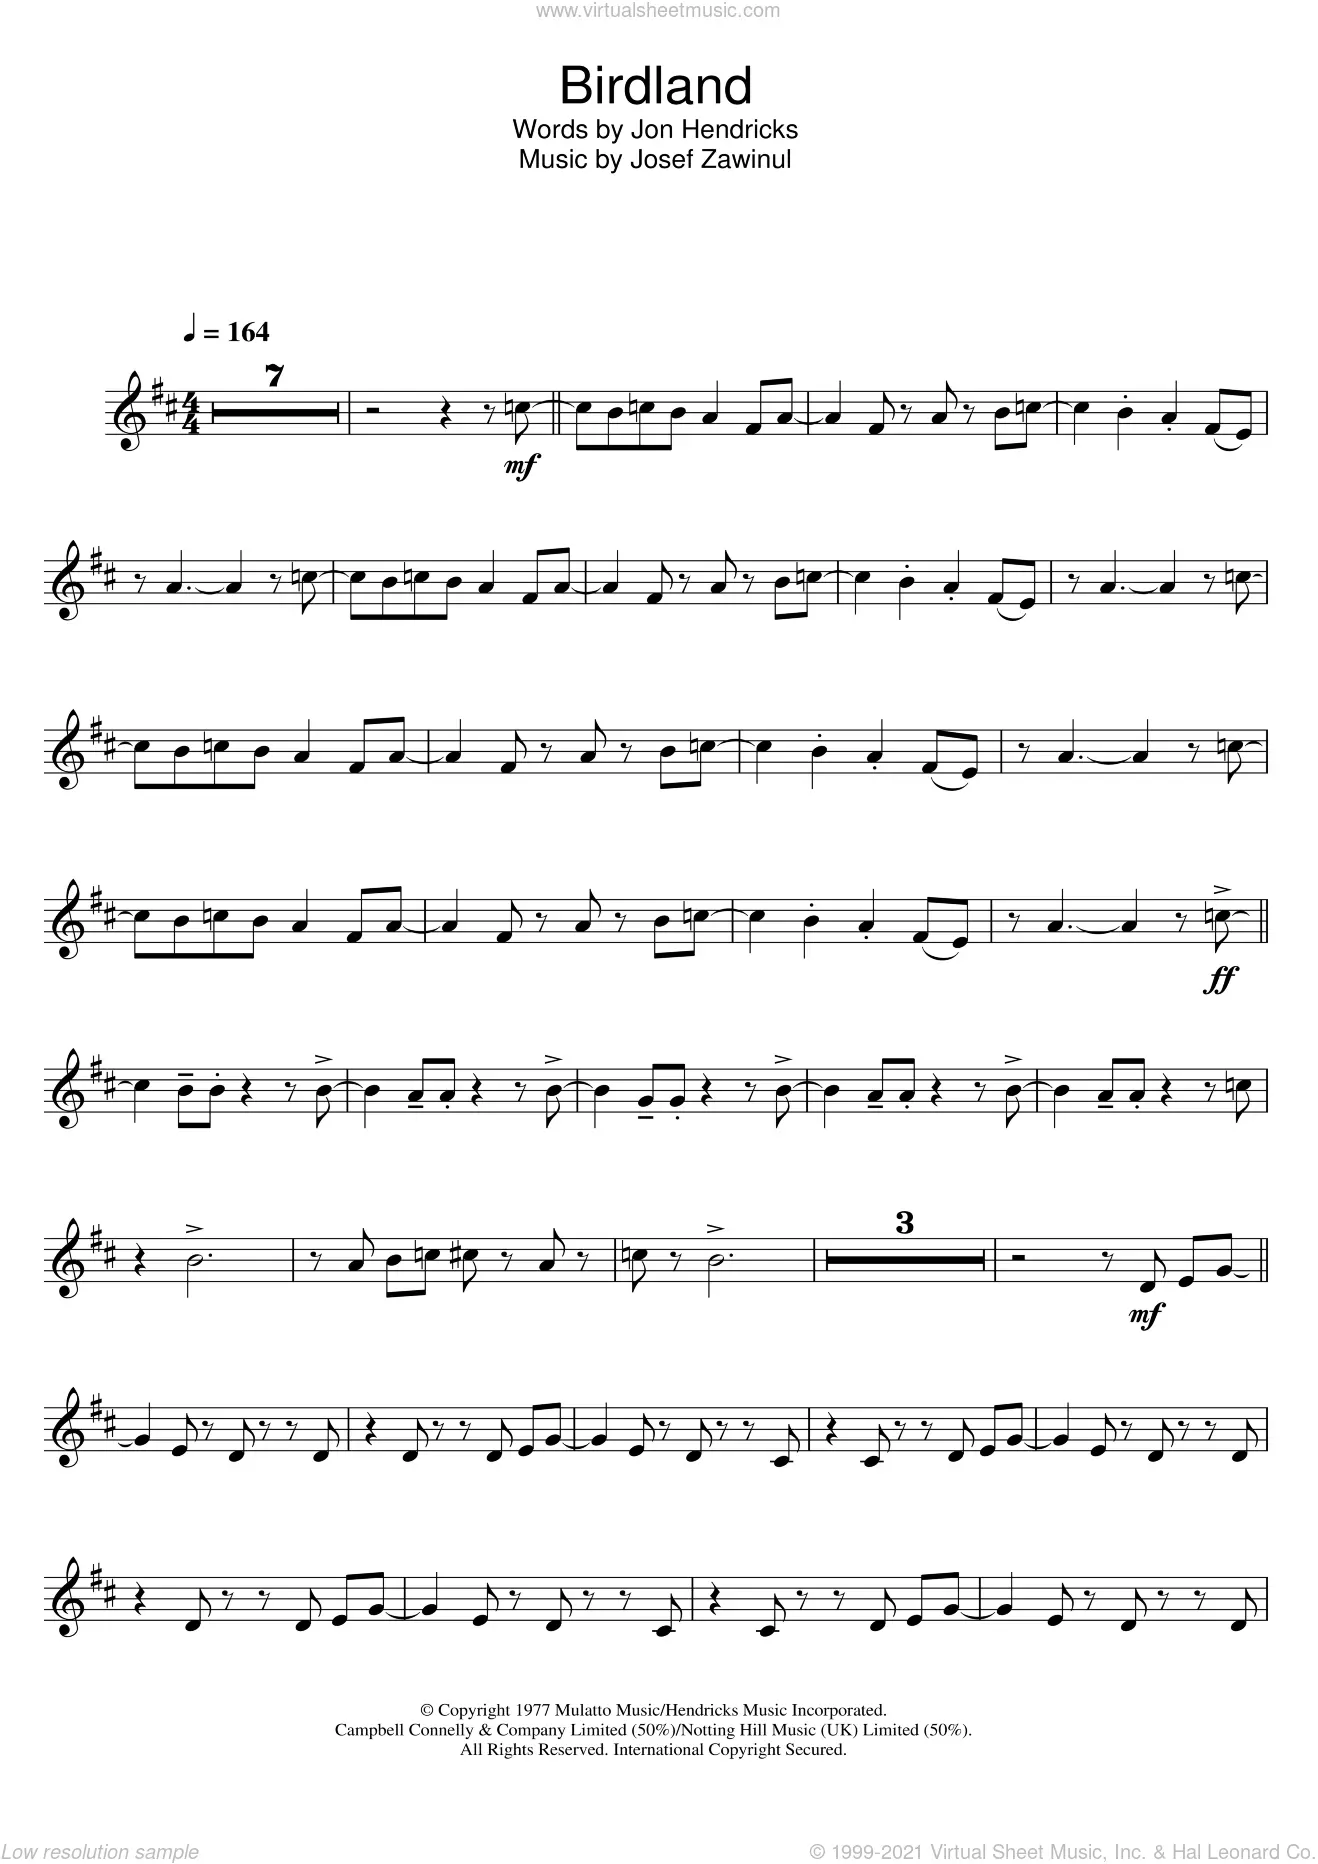 Weather Report Sheet Music to download and print